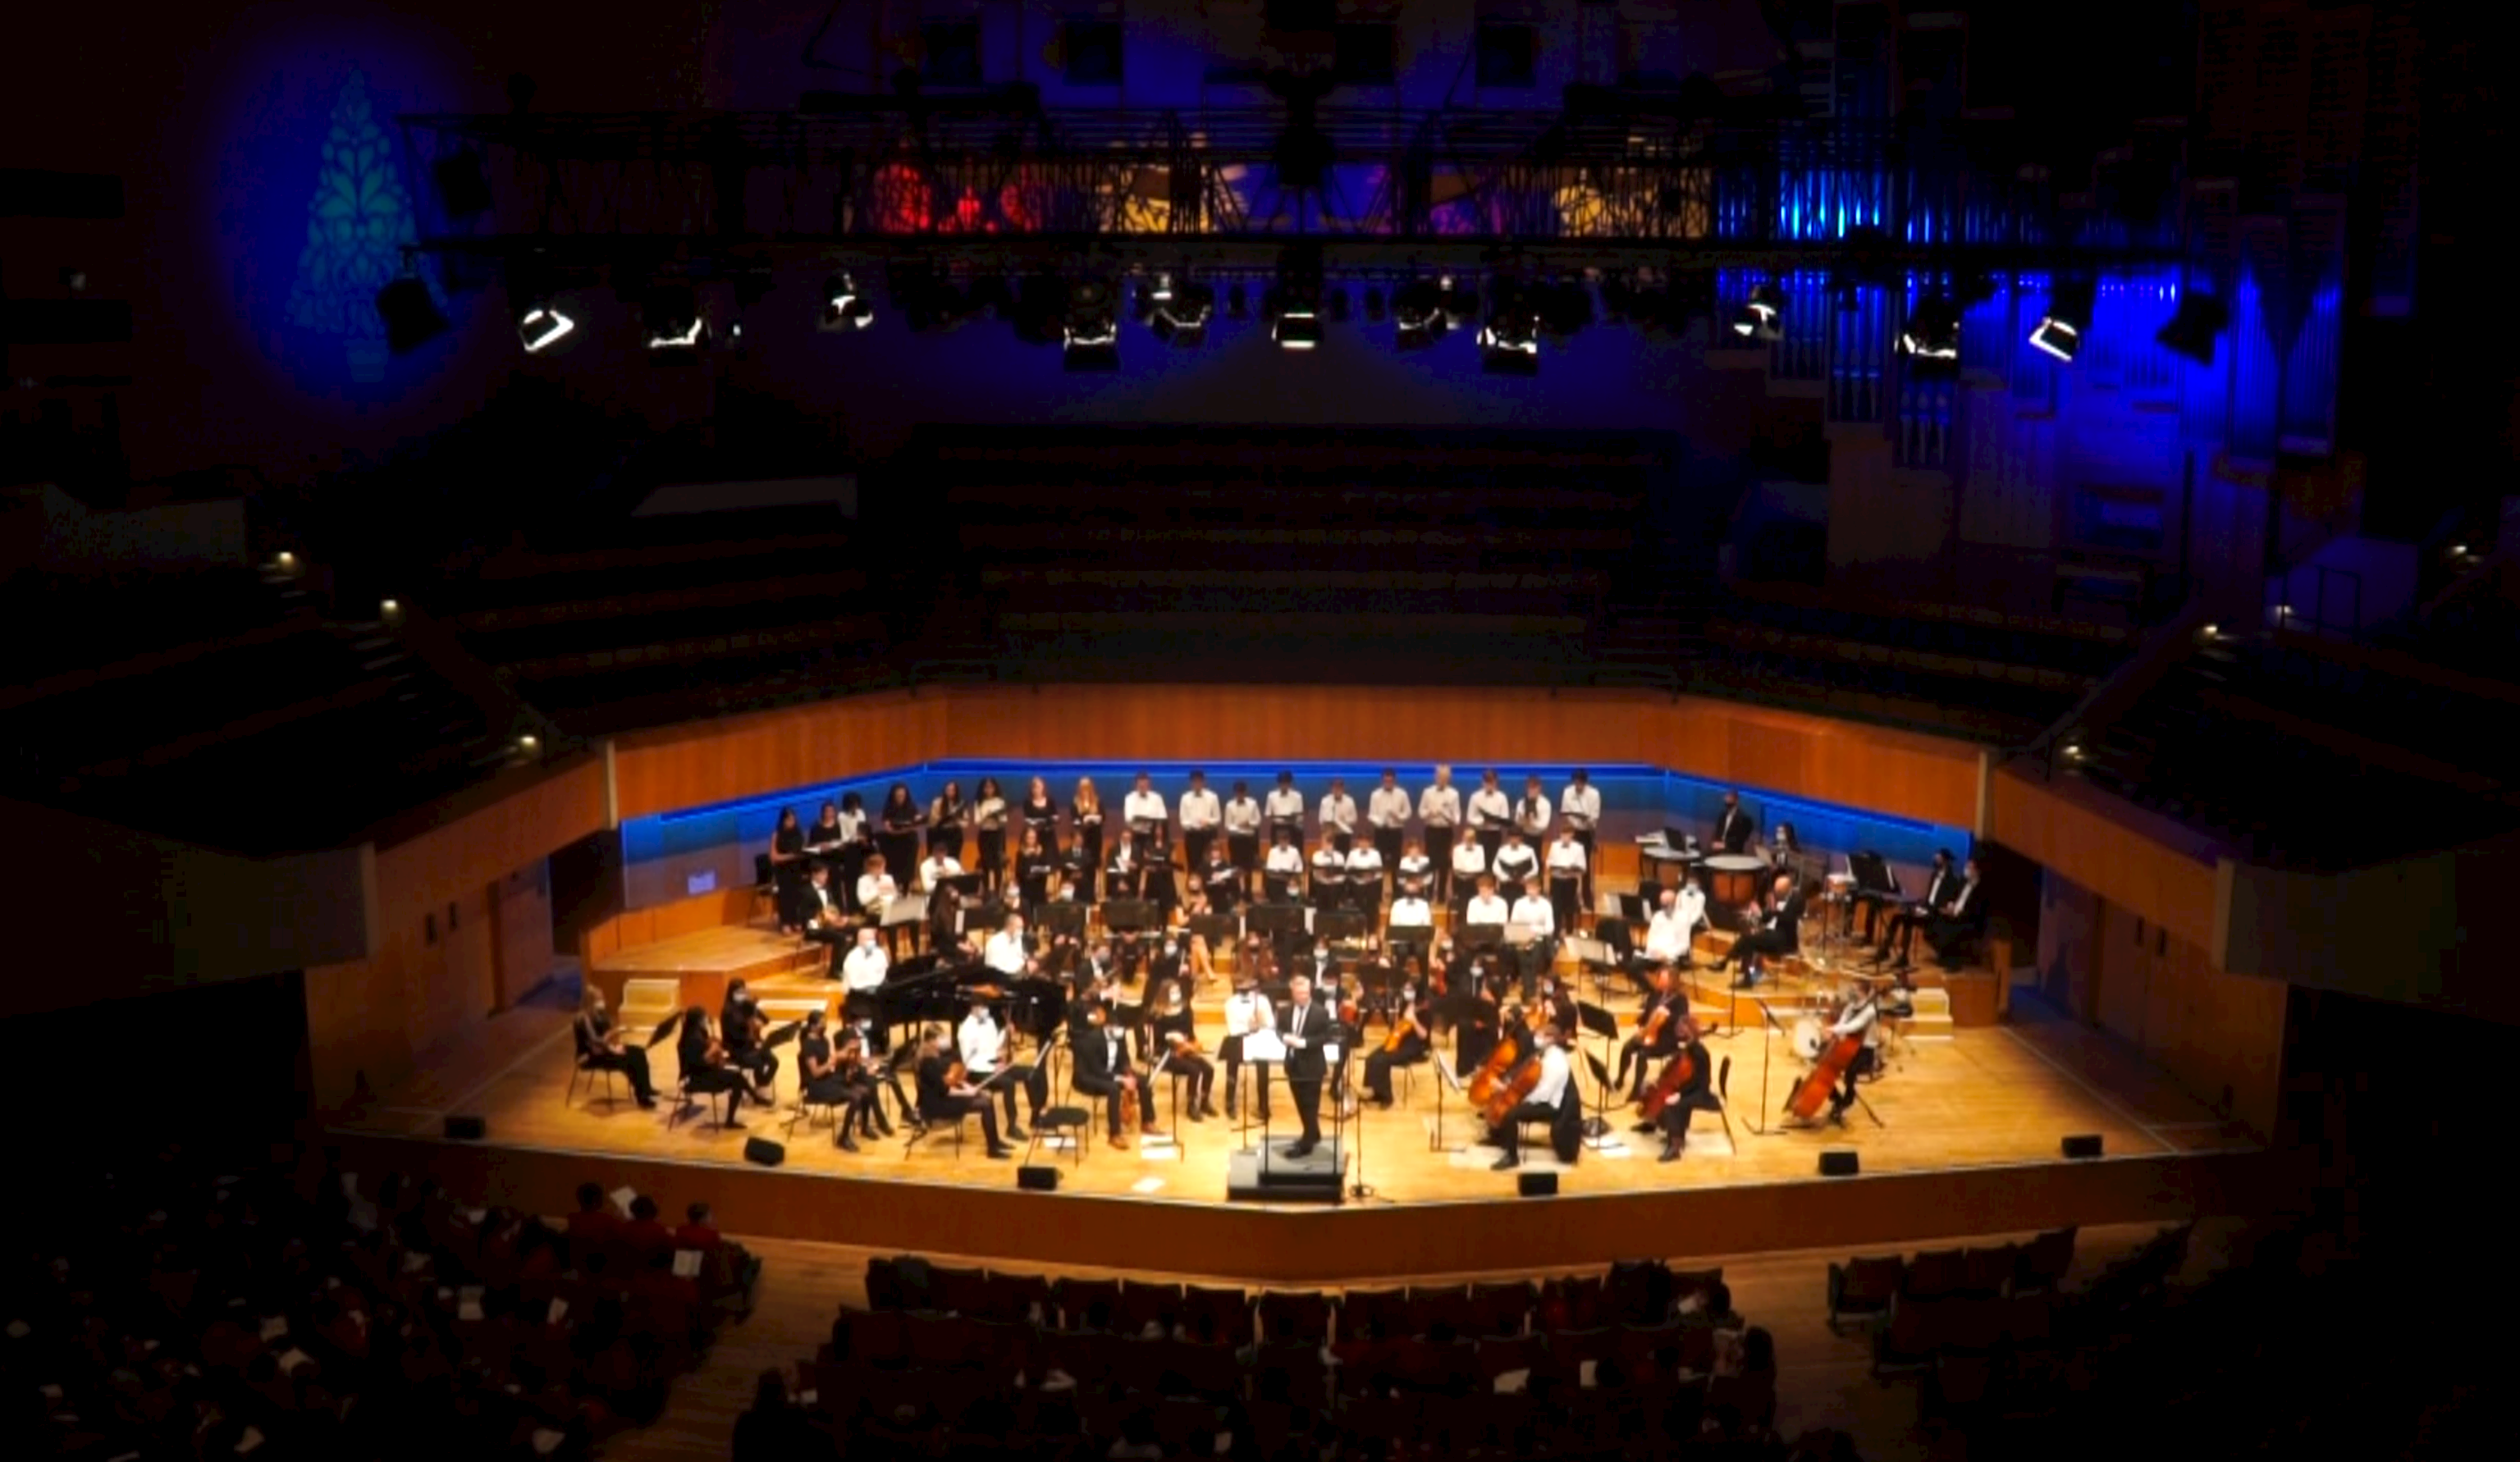 Annual Concert at St David's Hall, Cardiff